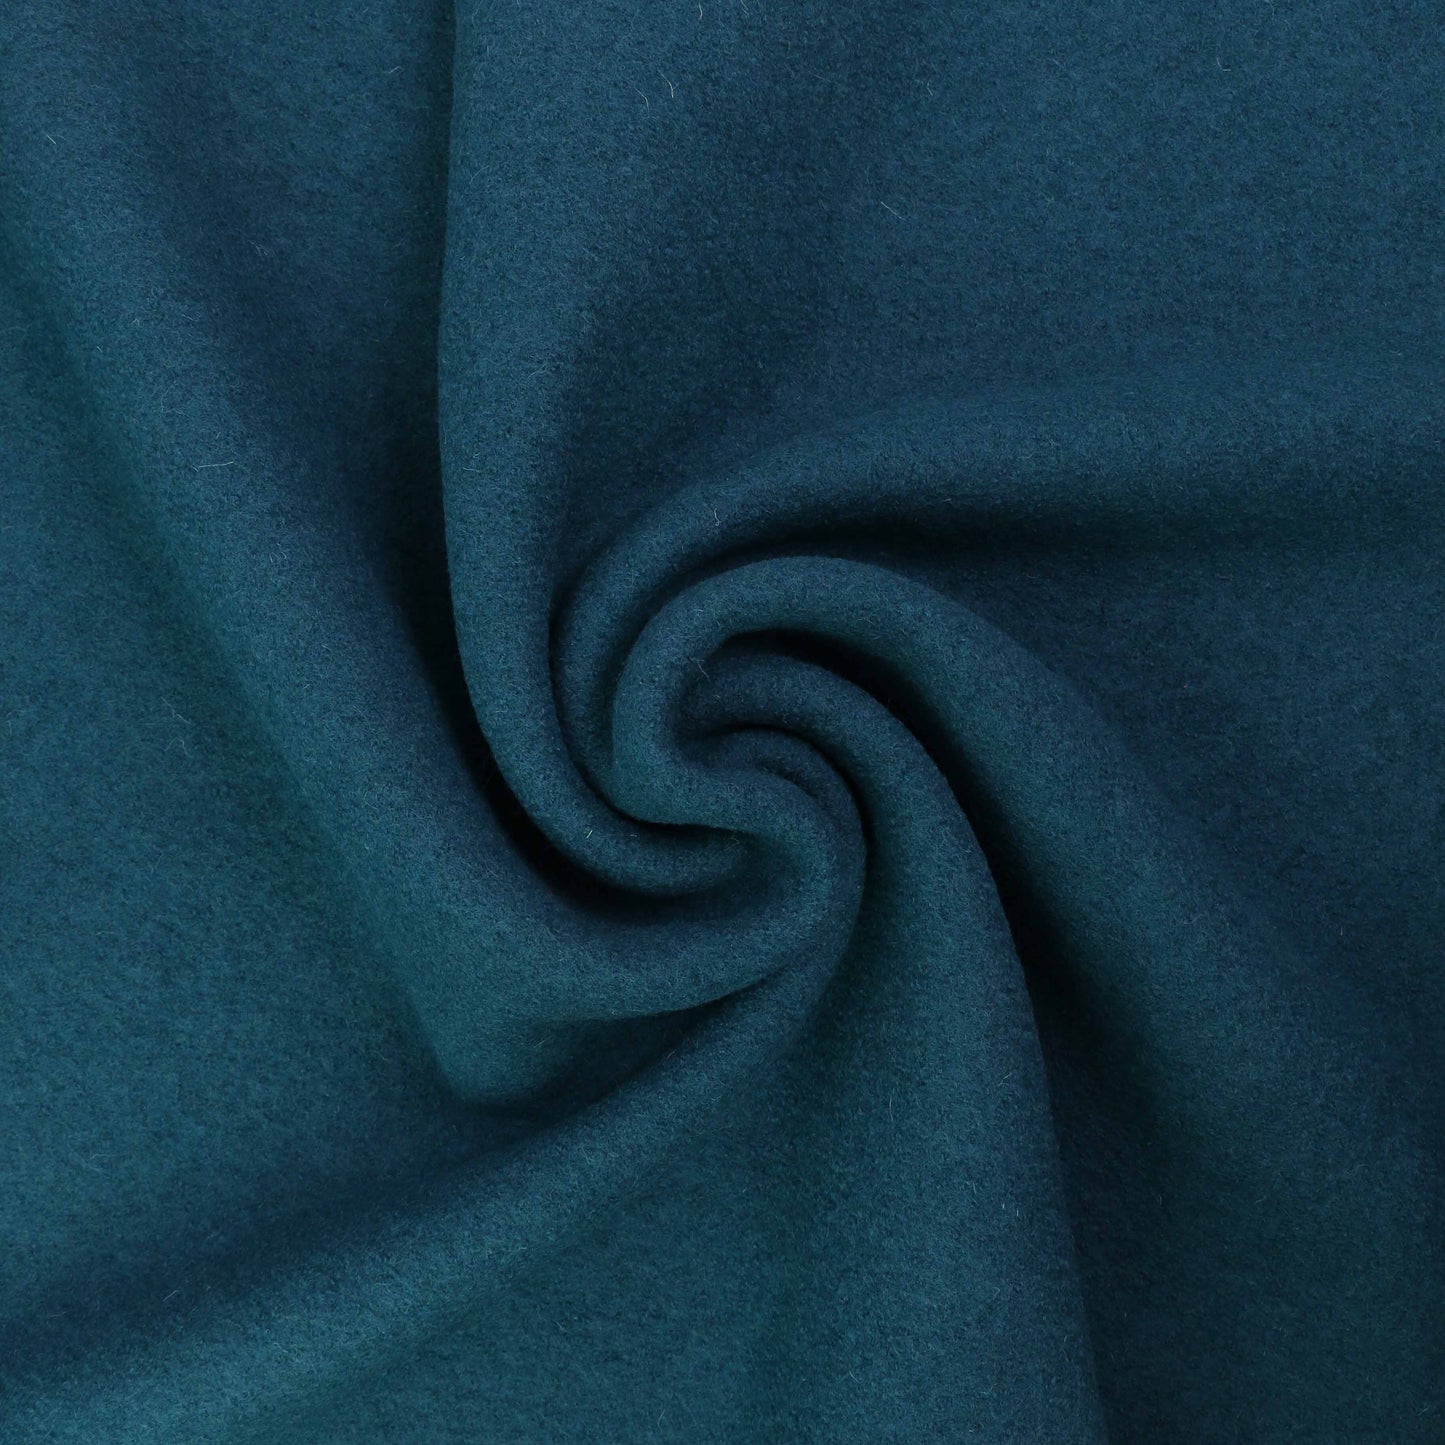 Boiled Wool Fabric - Black, navy, teal, mustard, charcoal